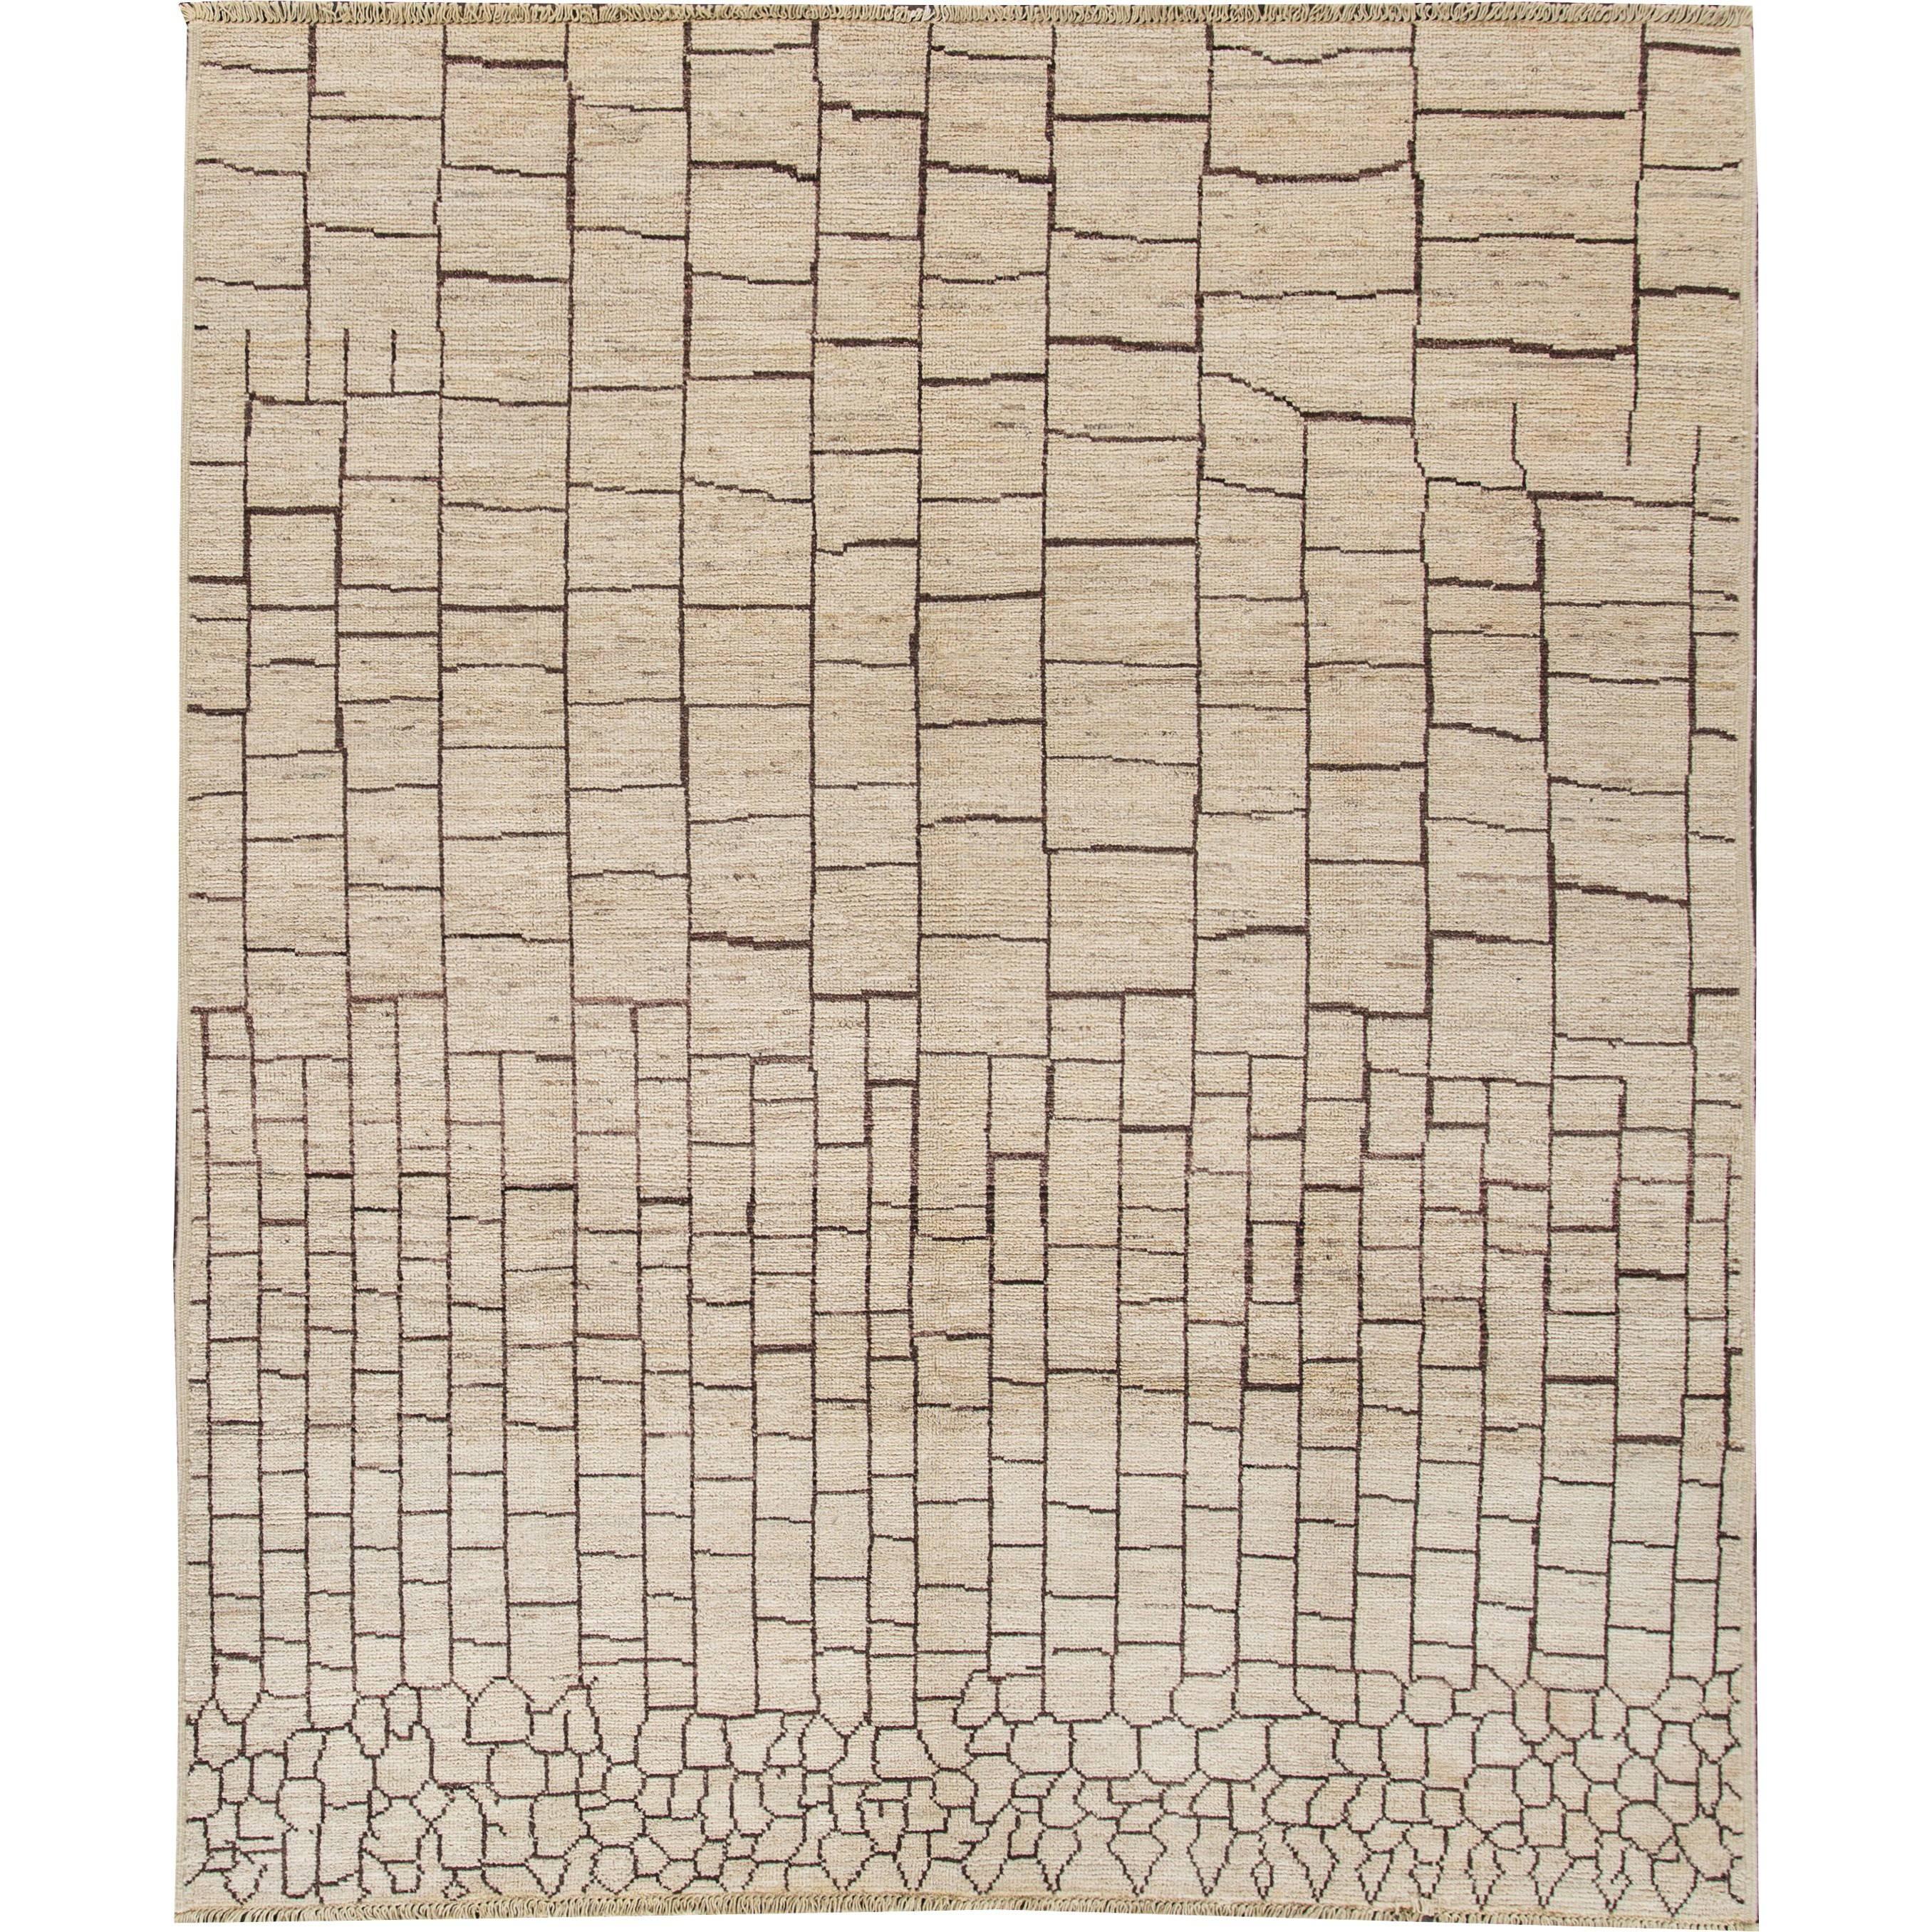 Great Looking Modern Moroccan Style Rug